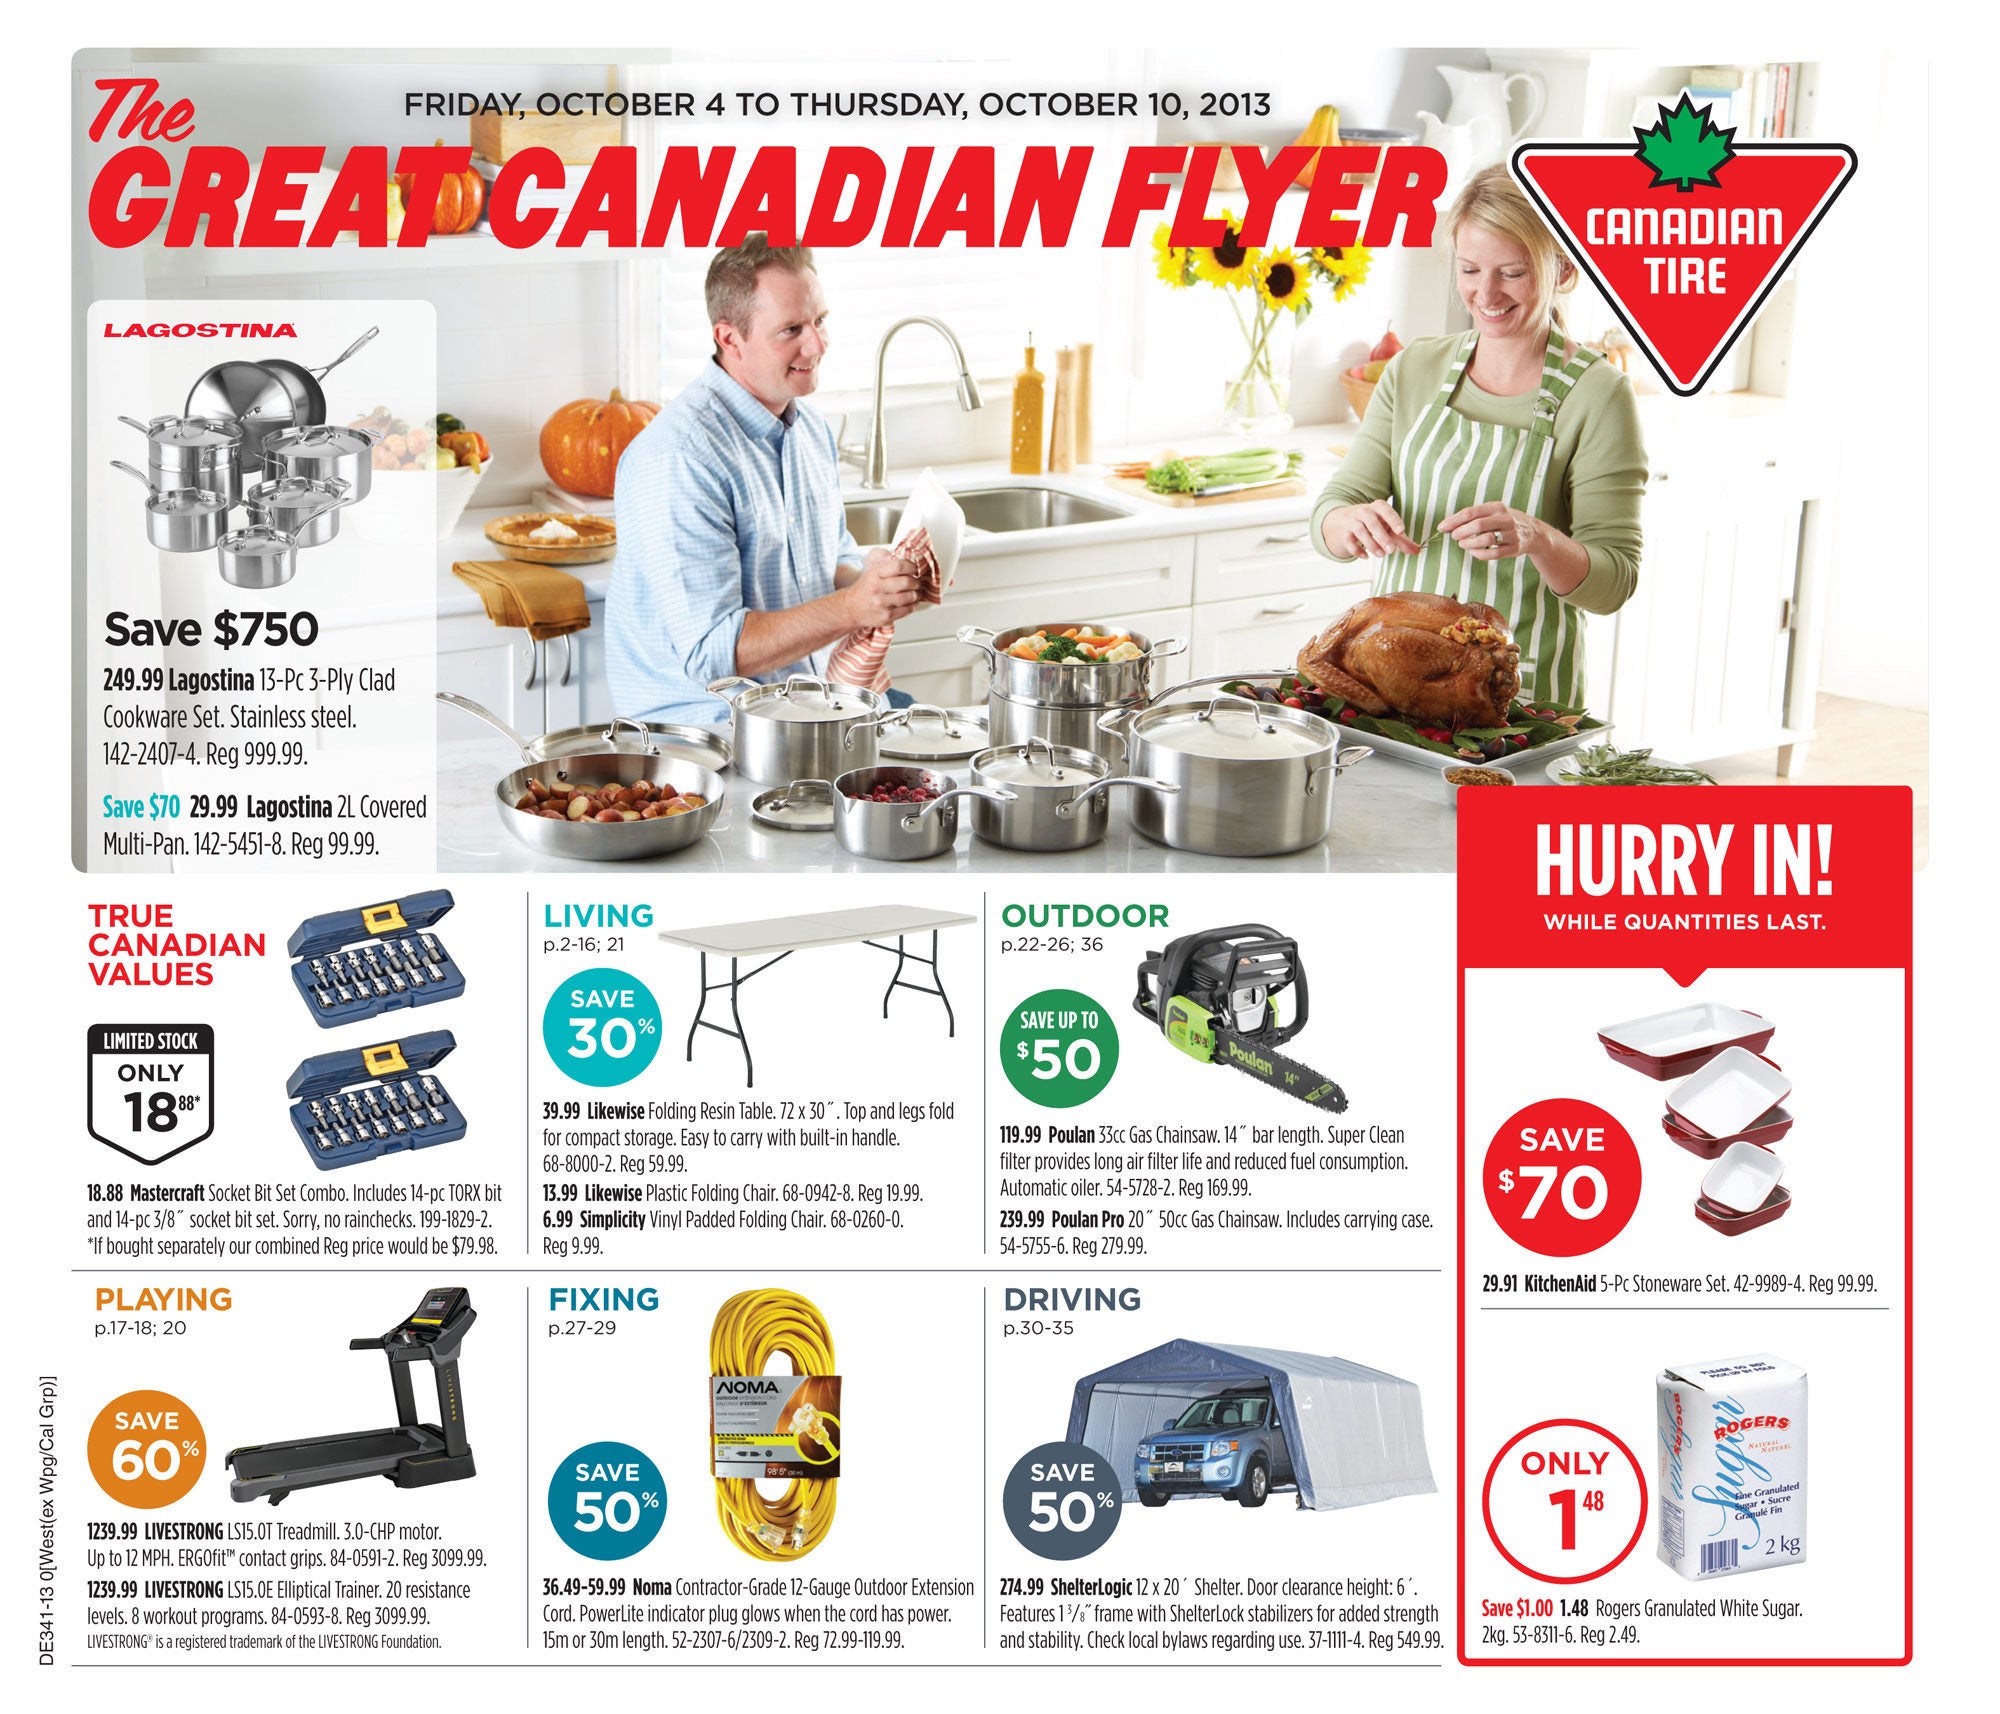 Canadian Tire] $14.99 Starfrit Securimax Can Opener - RedFlagDeals.com  Forums